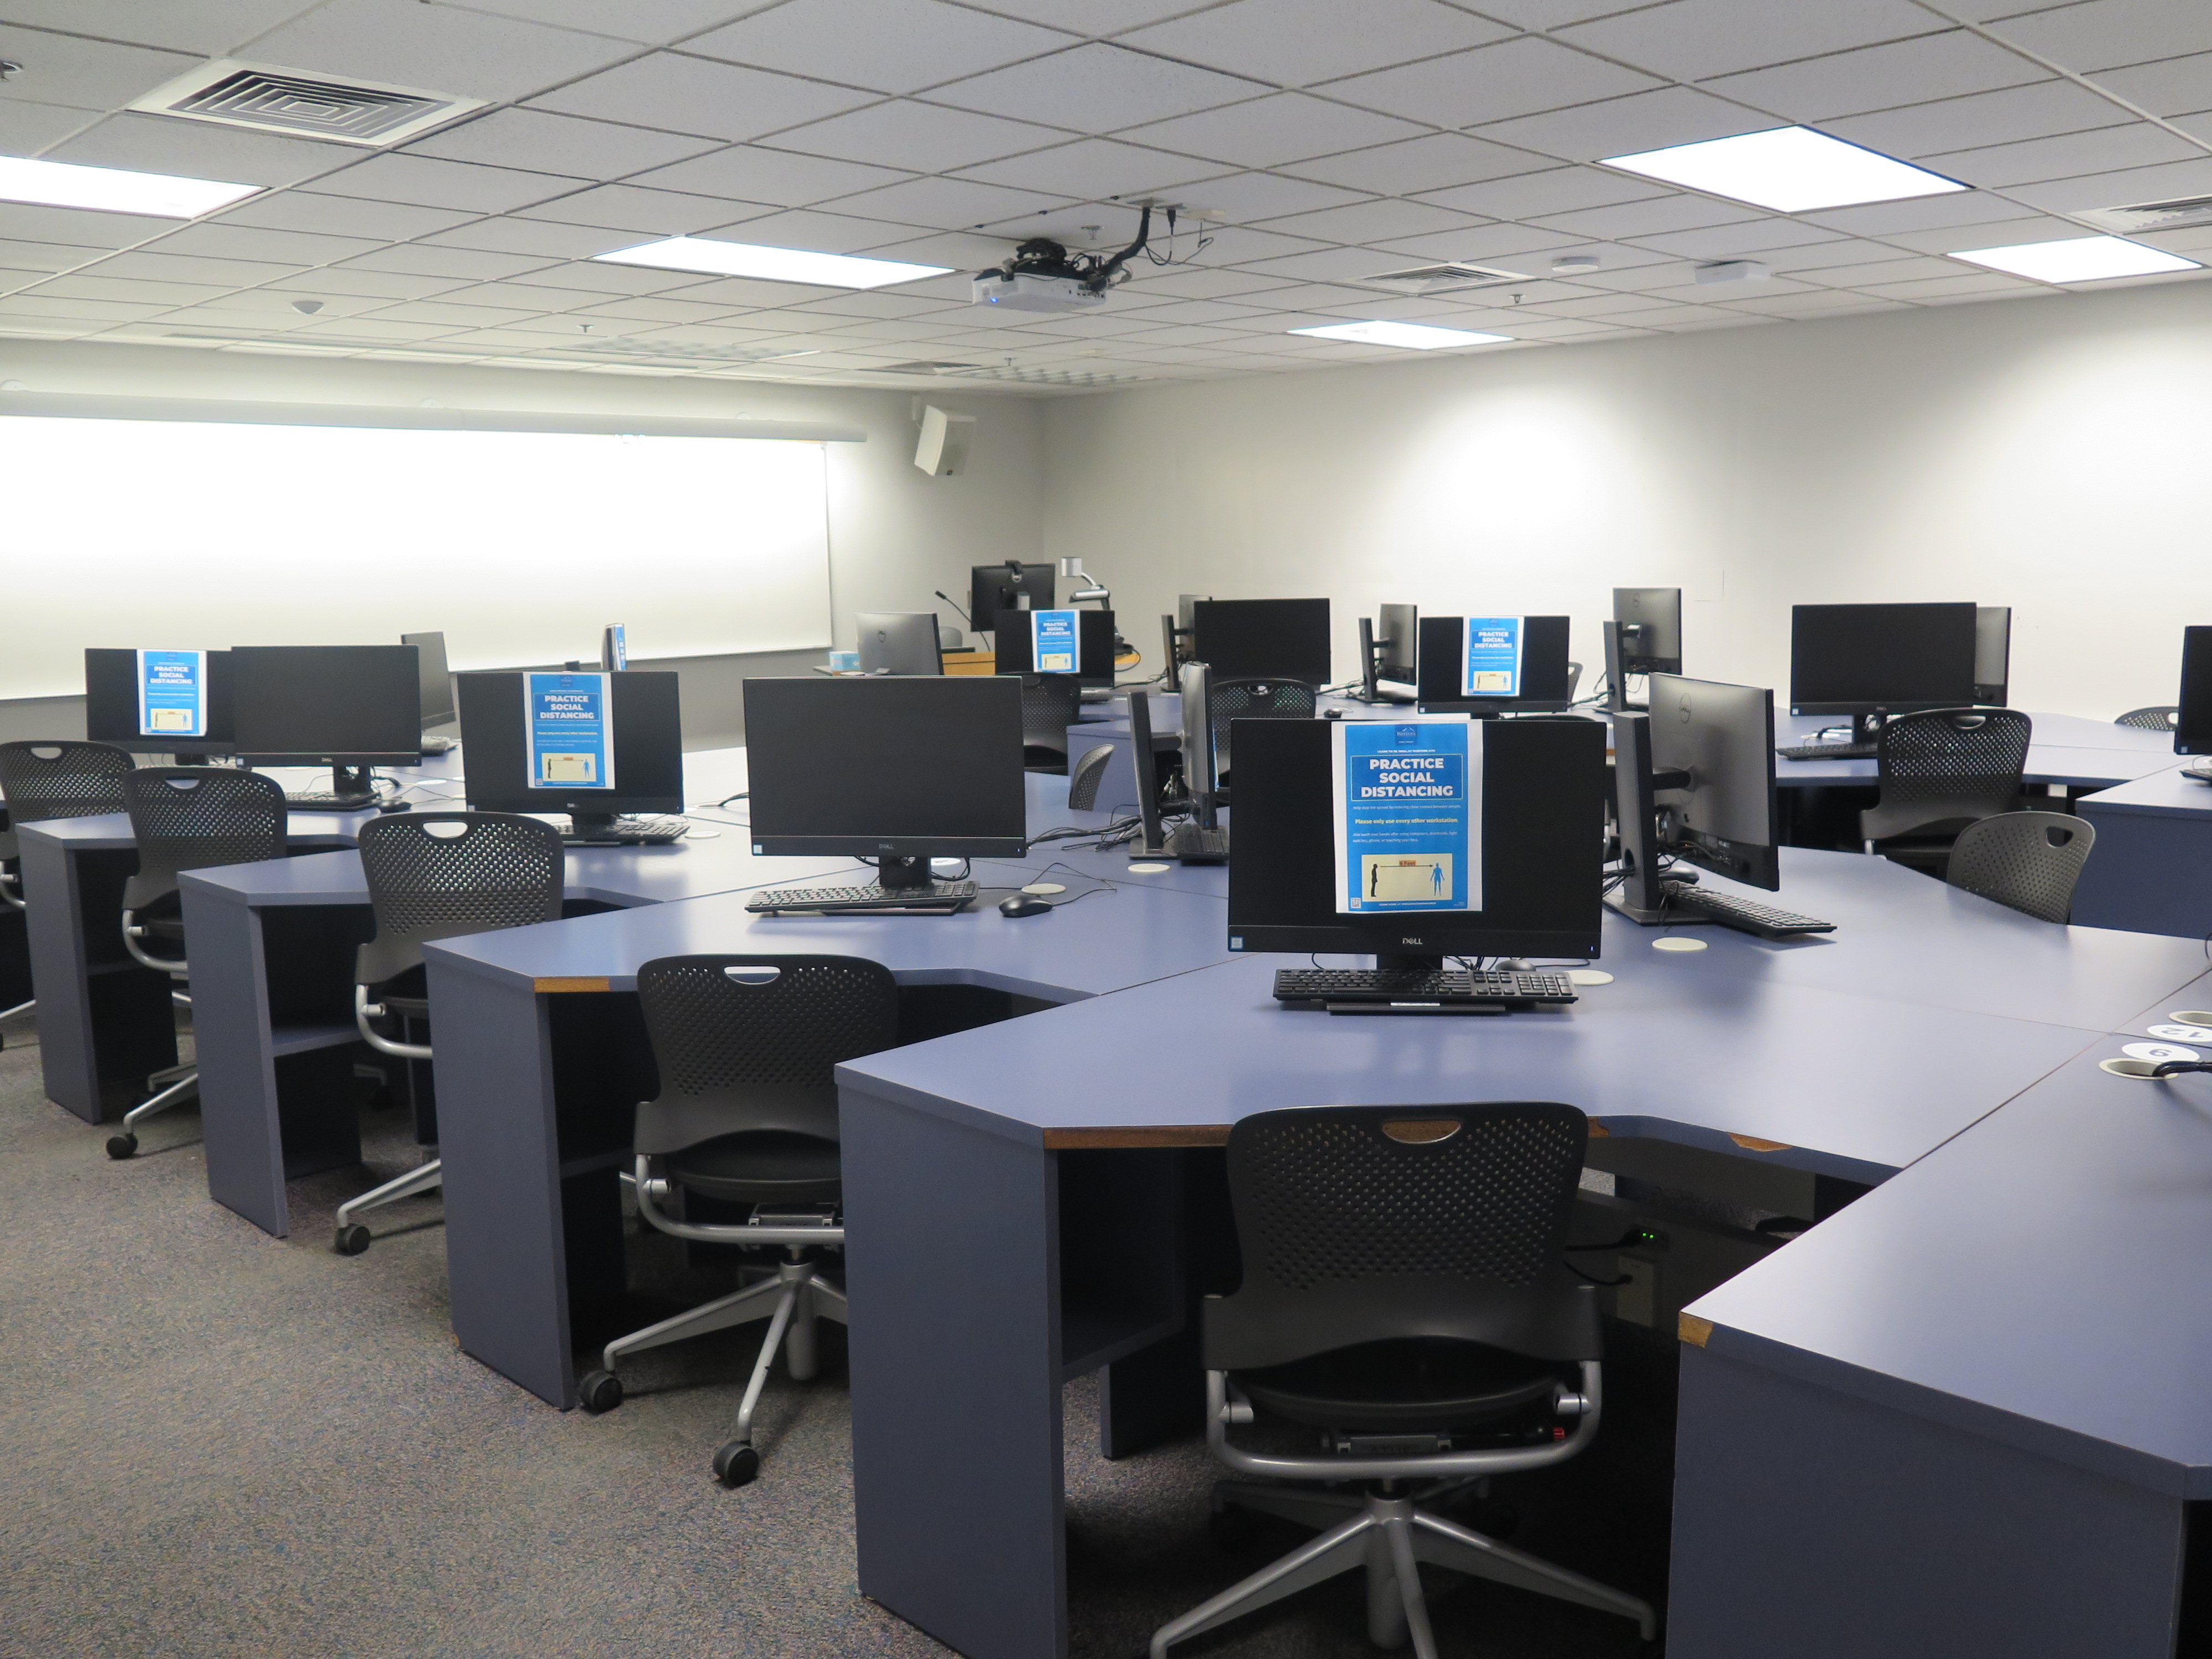 Computer Lab consists of carpet floor, individual computer stations in a row with an aisle in between each row, and Podium and whiteboard located at the front of the room.